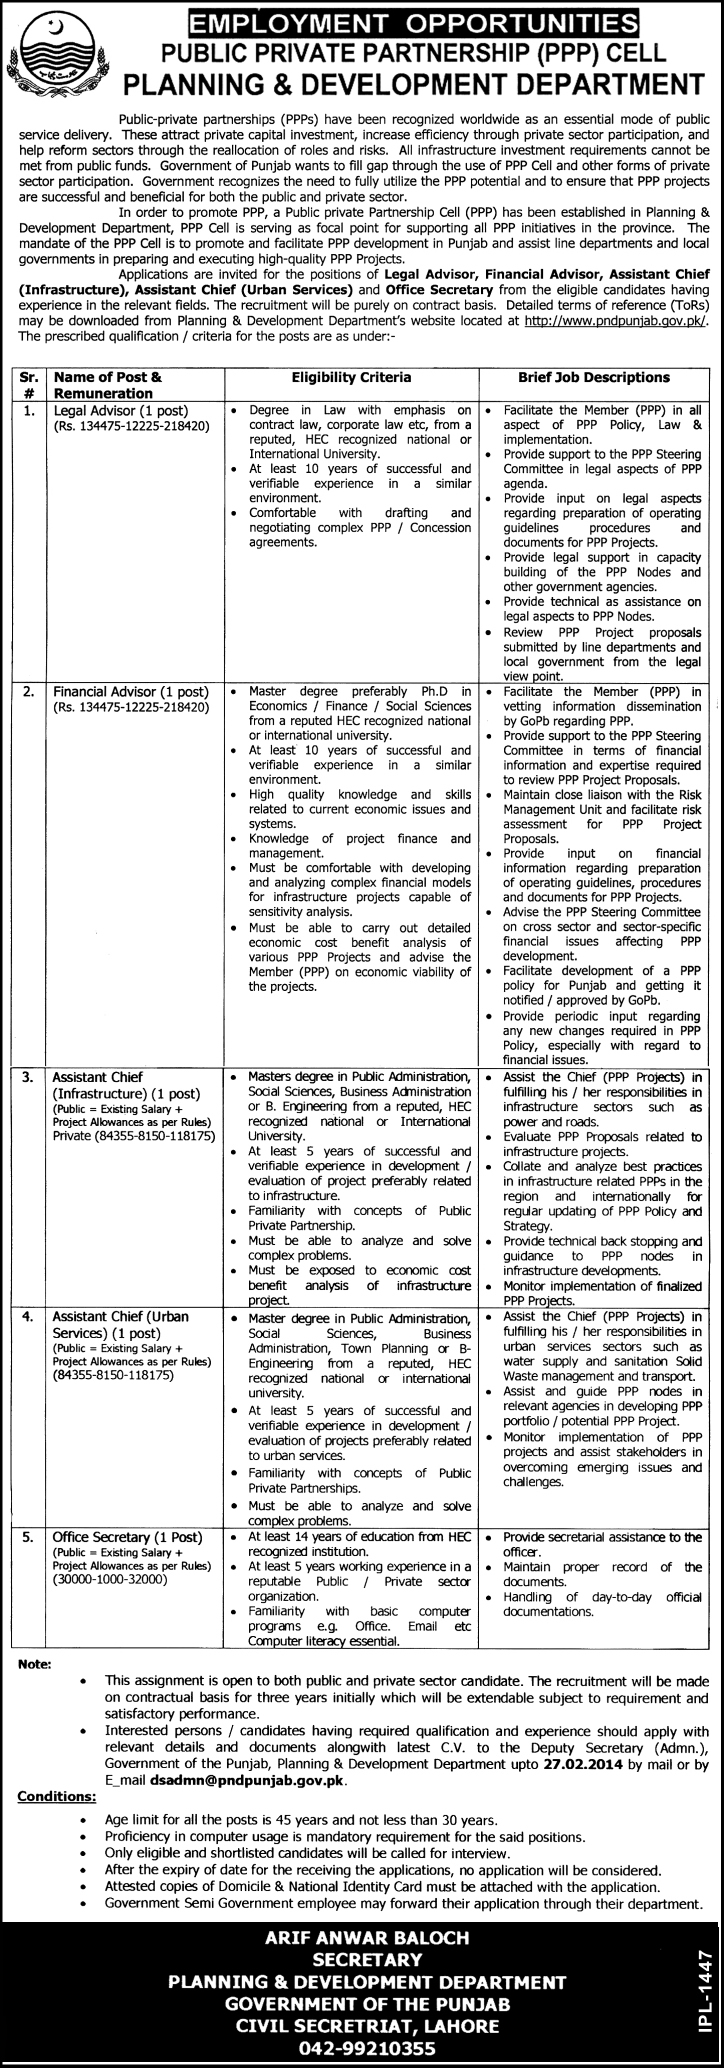 Public Private Partnership (PPP) Cell Punjab Jobs 2014 February